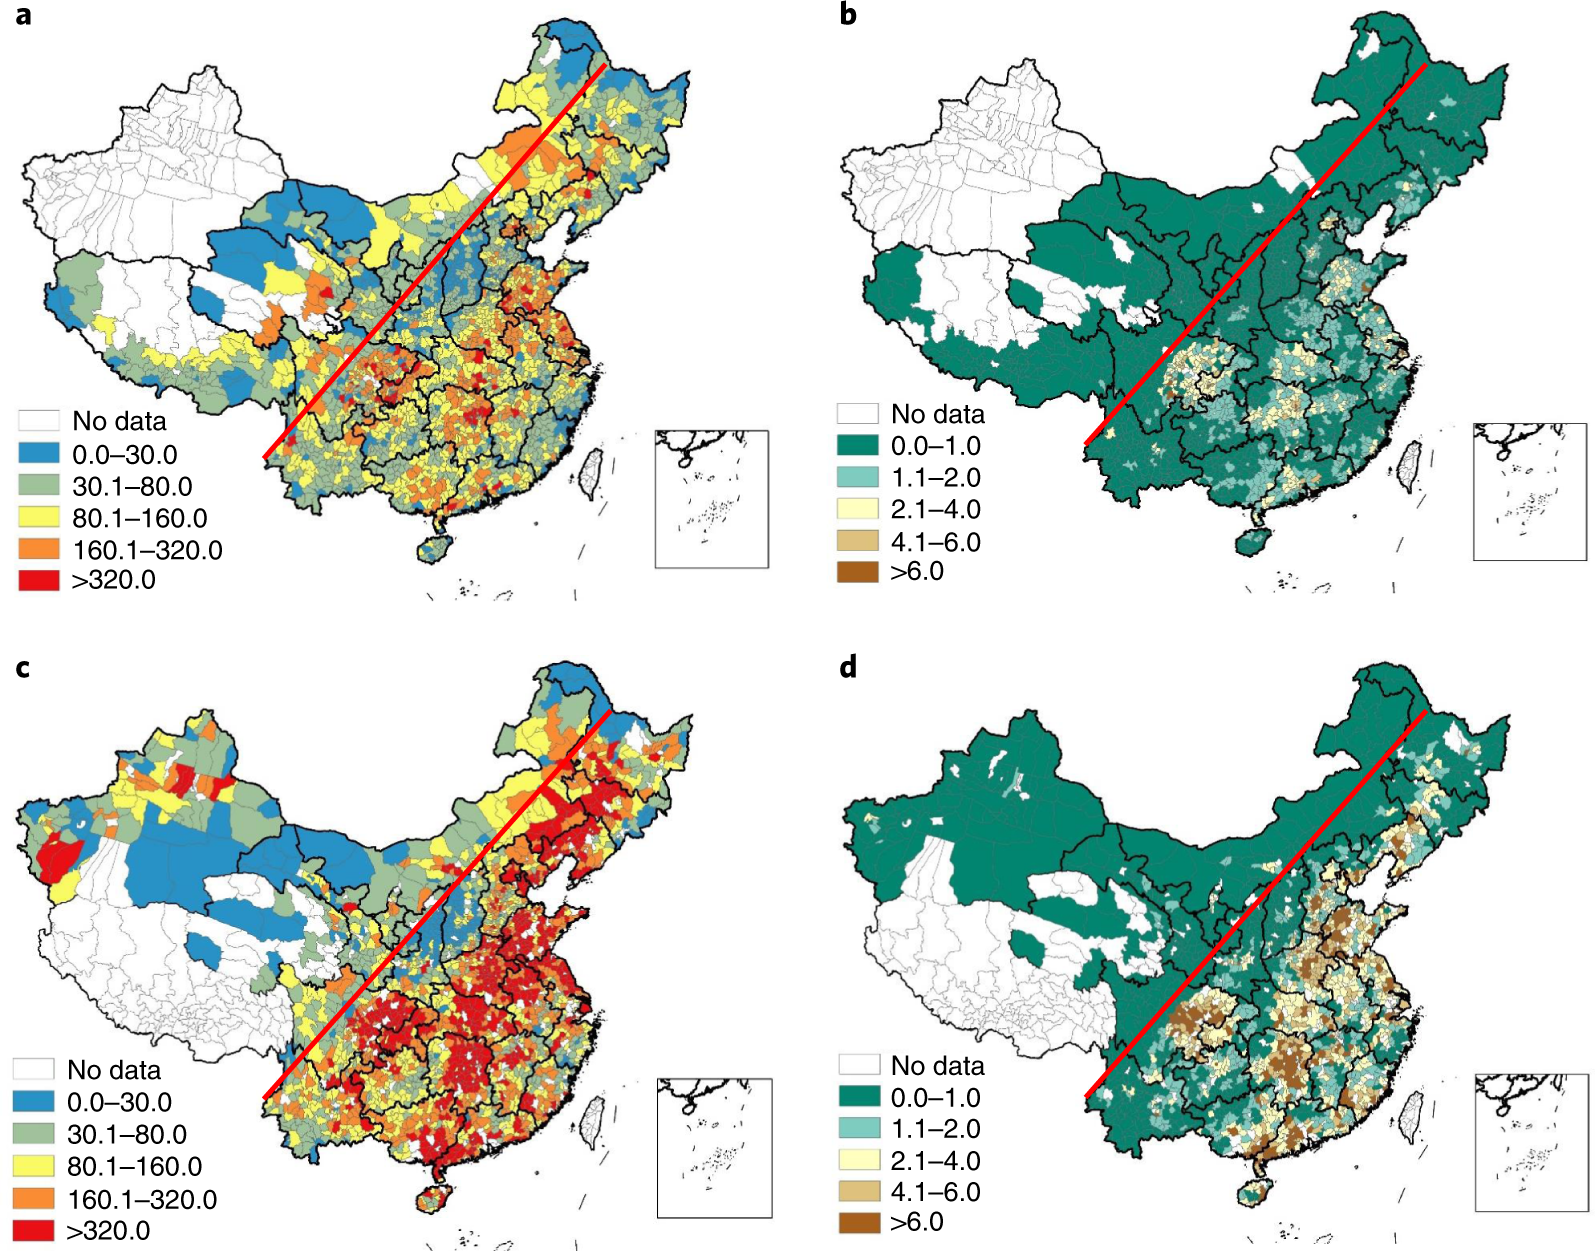 Relocate 10 billion livestock to reduce harmful nitrogen pollution exposure  for 90% of China's population | Nature Food